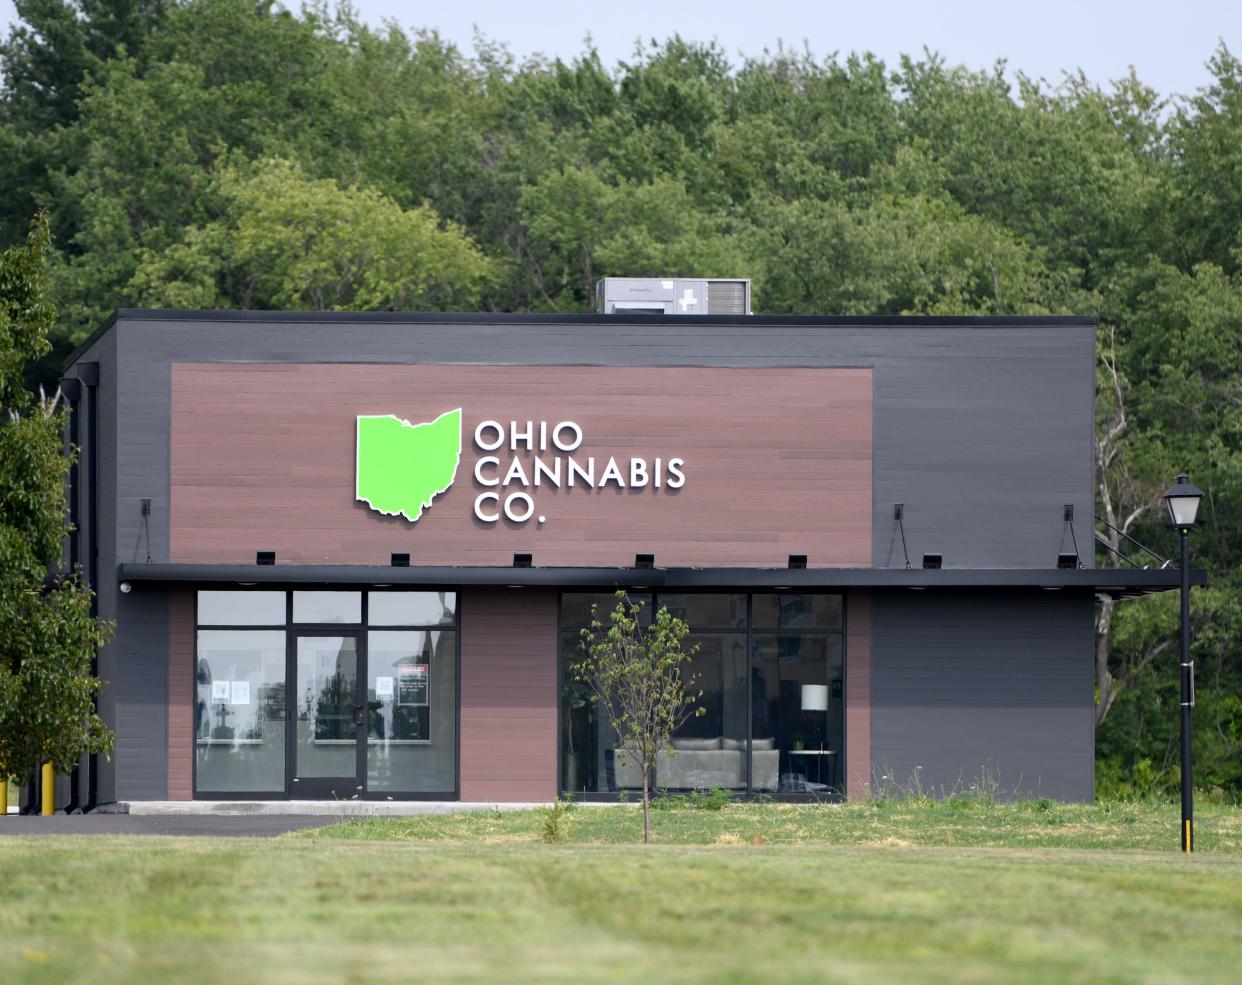 Ohio Cannabis Co., the fourth medical marijuana dispensary in Canton, will open Wednesday. It is located at 4016 Greentree Ave. SW.